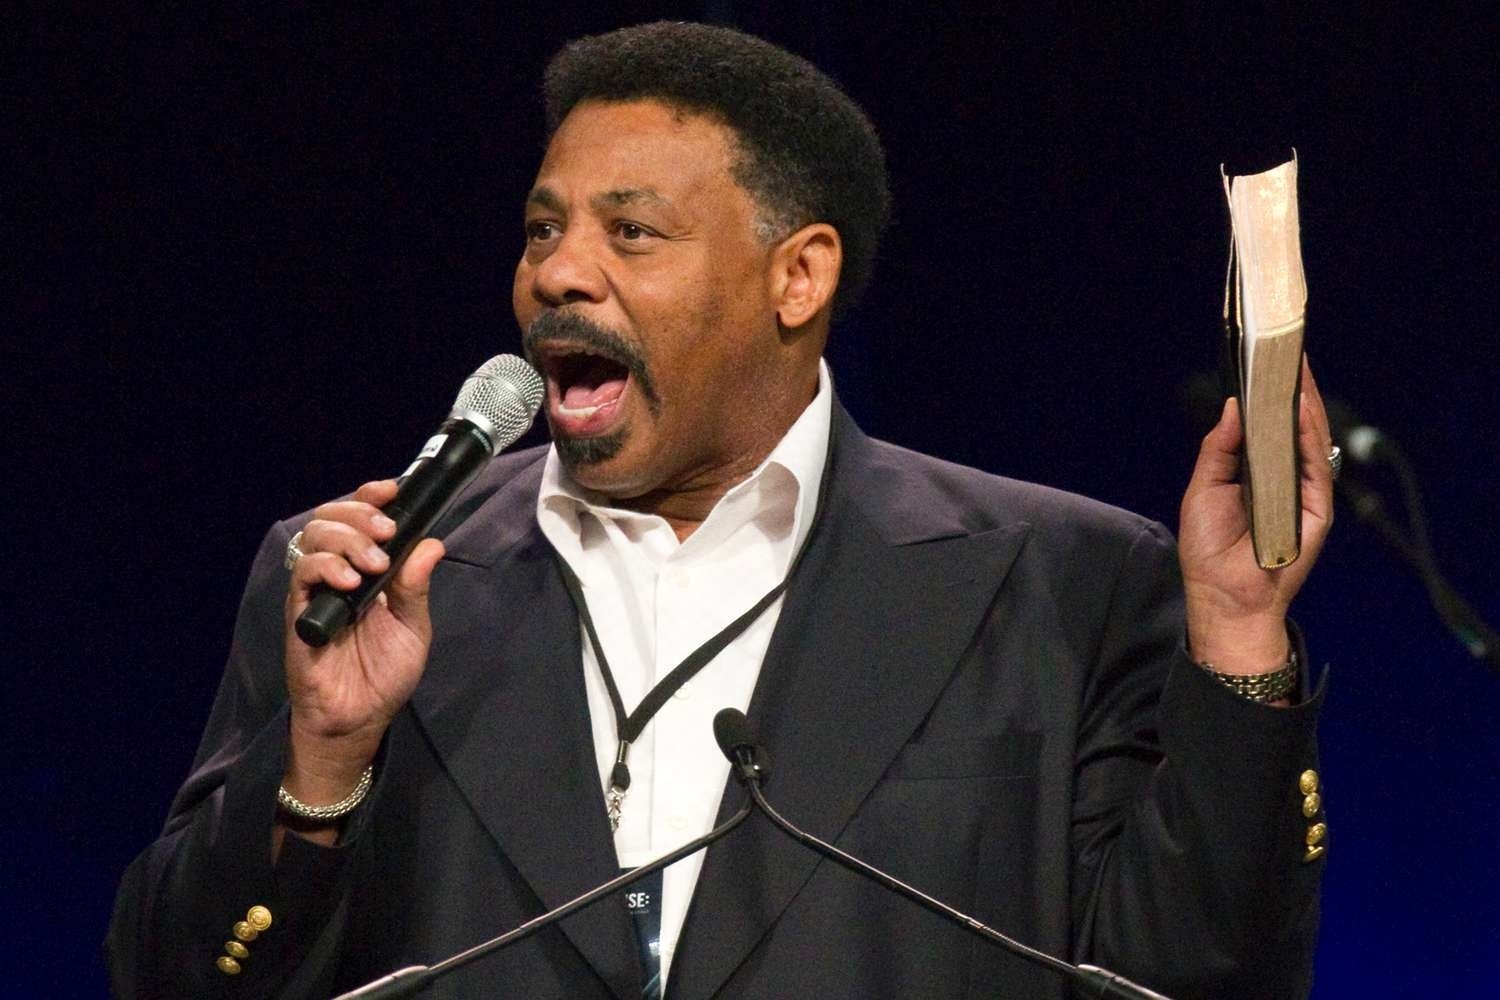 Megachurch pastor Tony Evans resigns after nearly 50 years as he confesses to mysterious ‘sin’